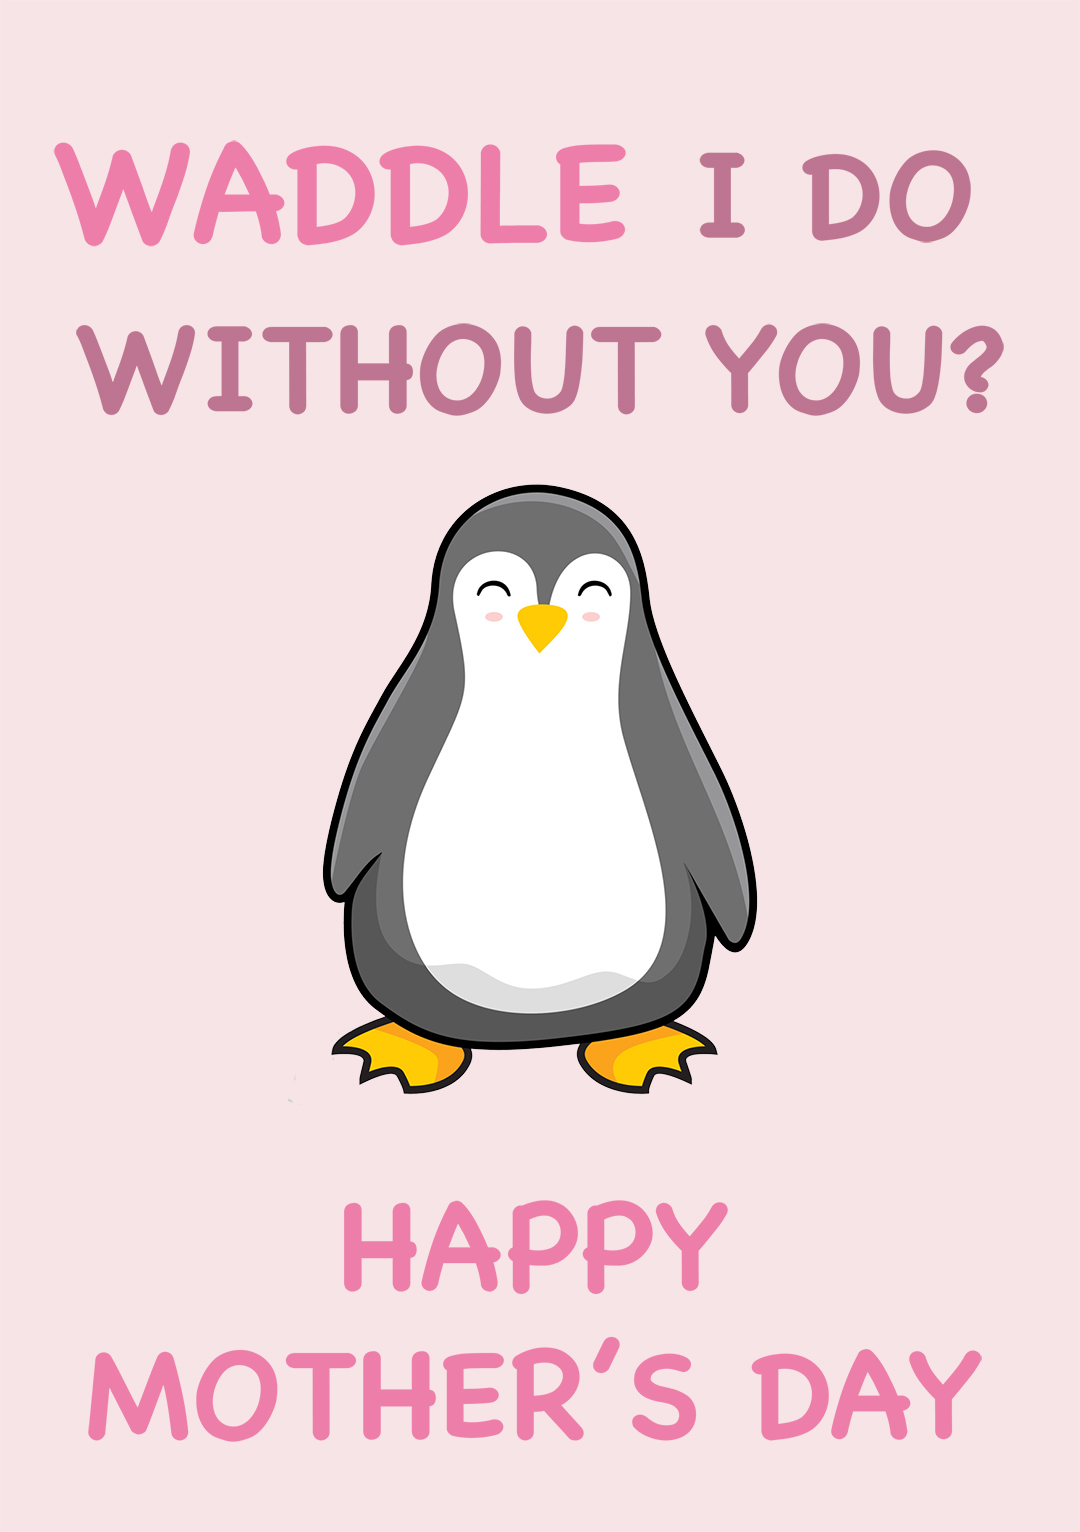 Waddle I Do Without You? Mother's Day Card